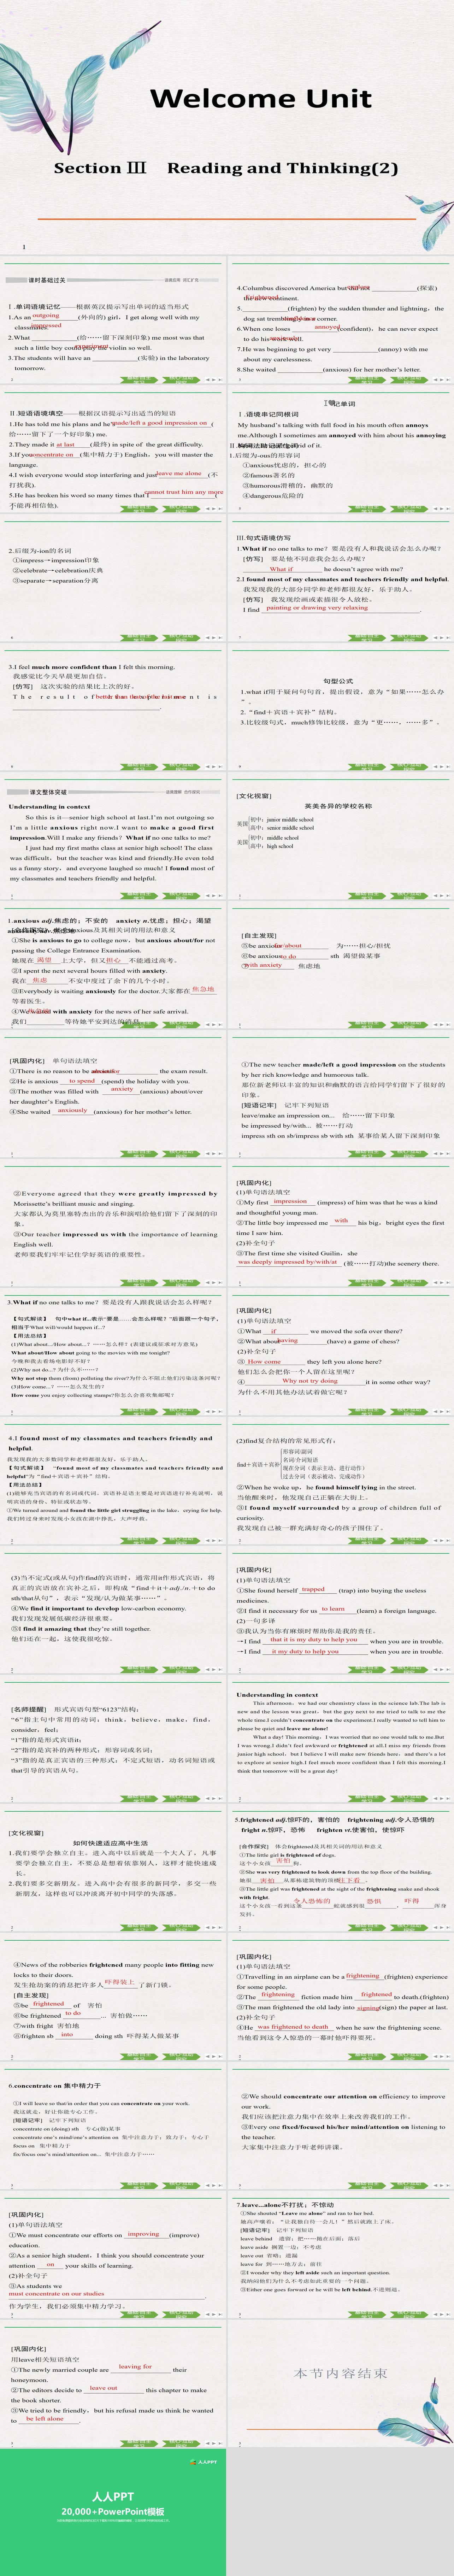 《Welcome Unit》Reading and Thinking PPT课件长图